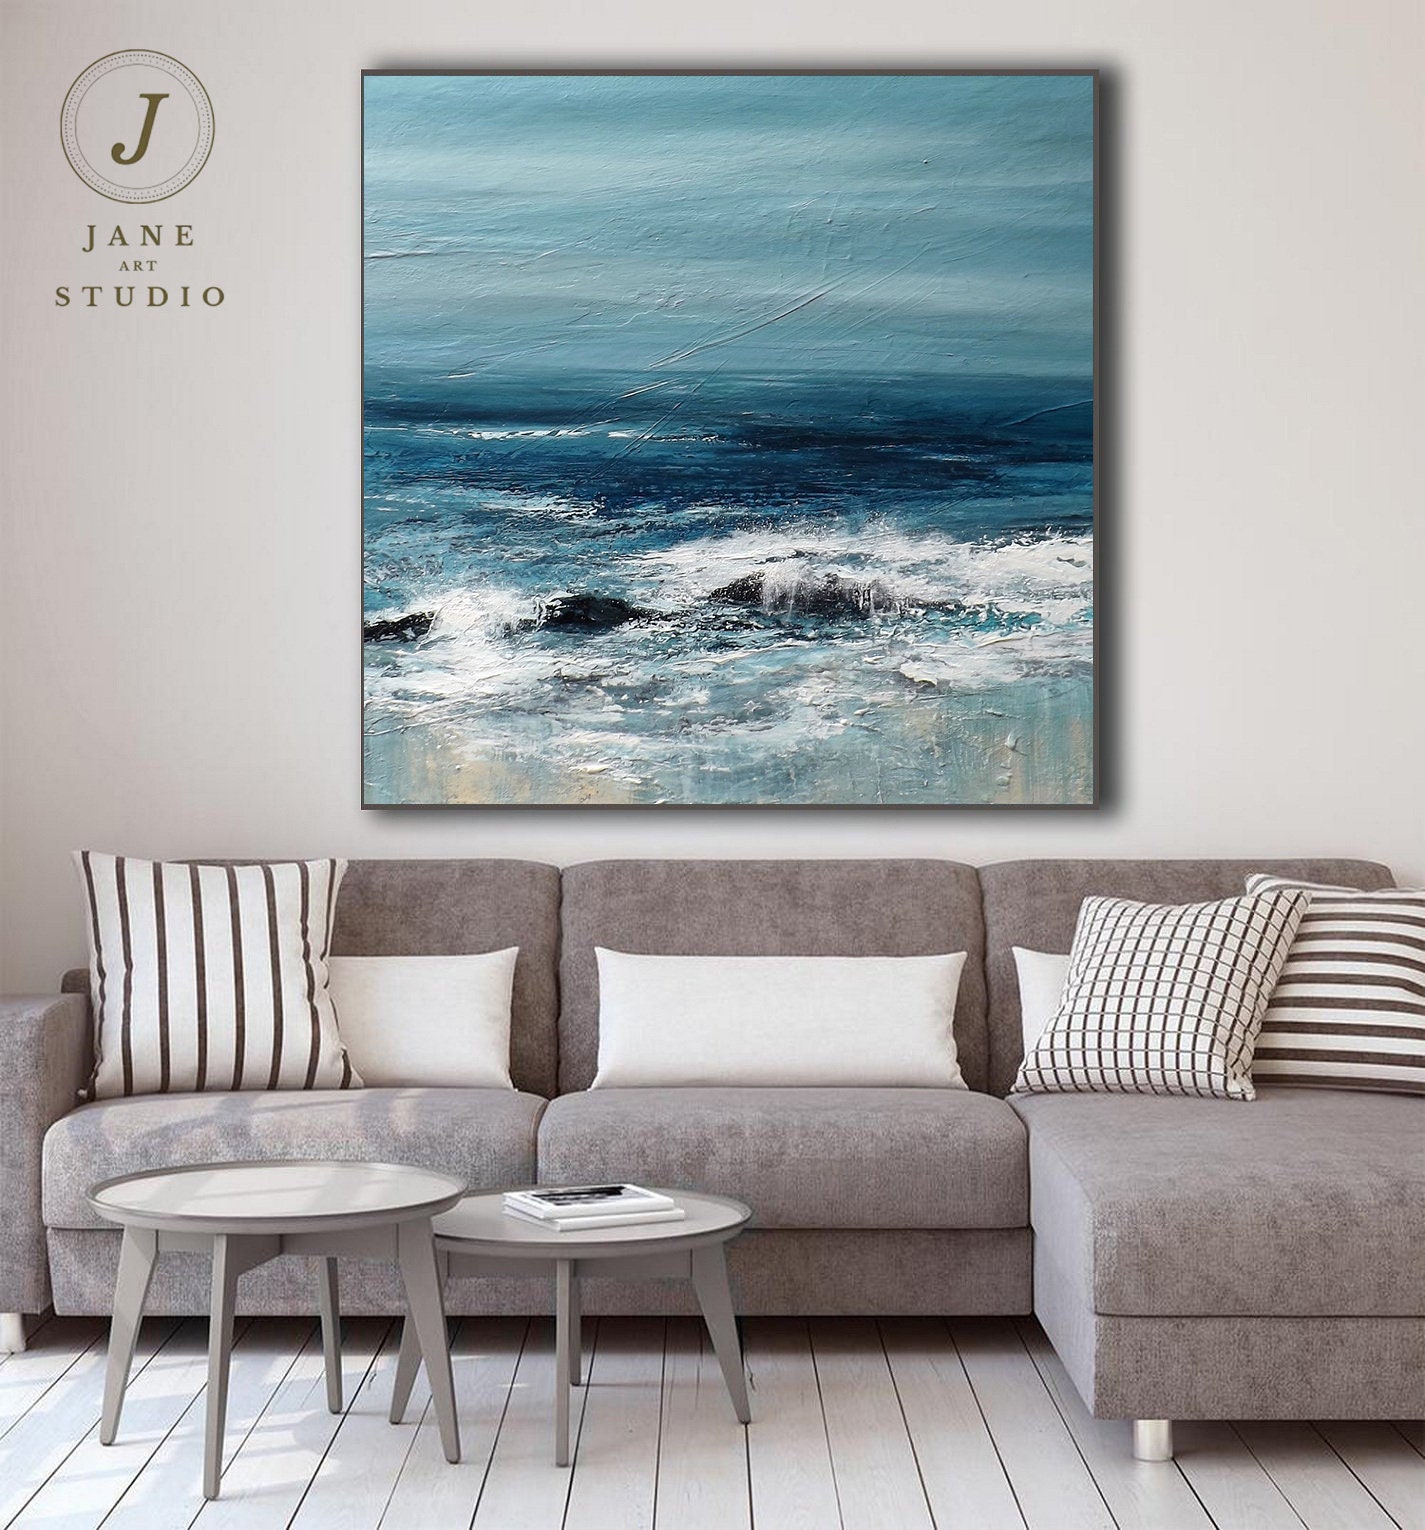 Ocean White Landscape Abstract Art, Painting Wave Blue Art Painting, on Large Original Sky Etsy - Painting Wall Painting, Canvas,large Room Living